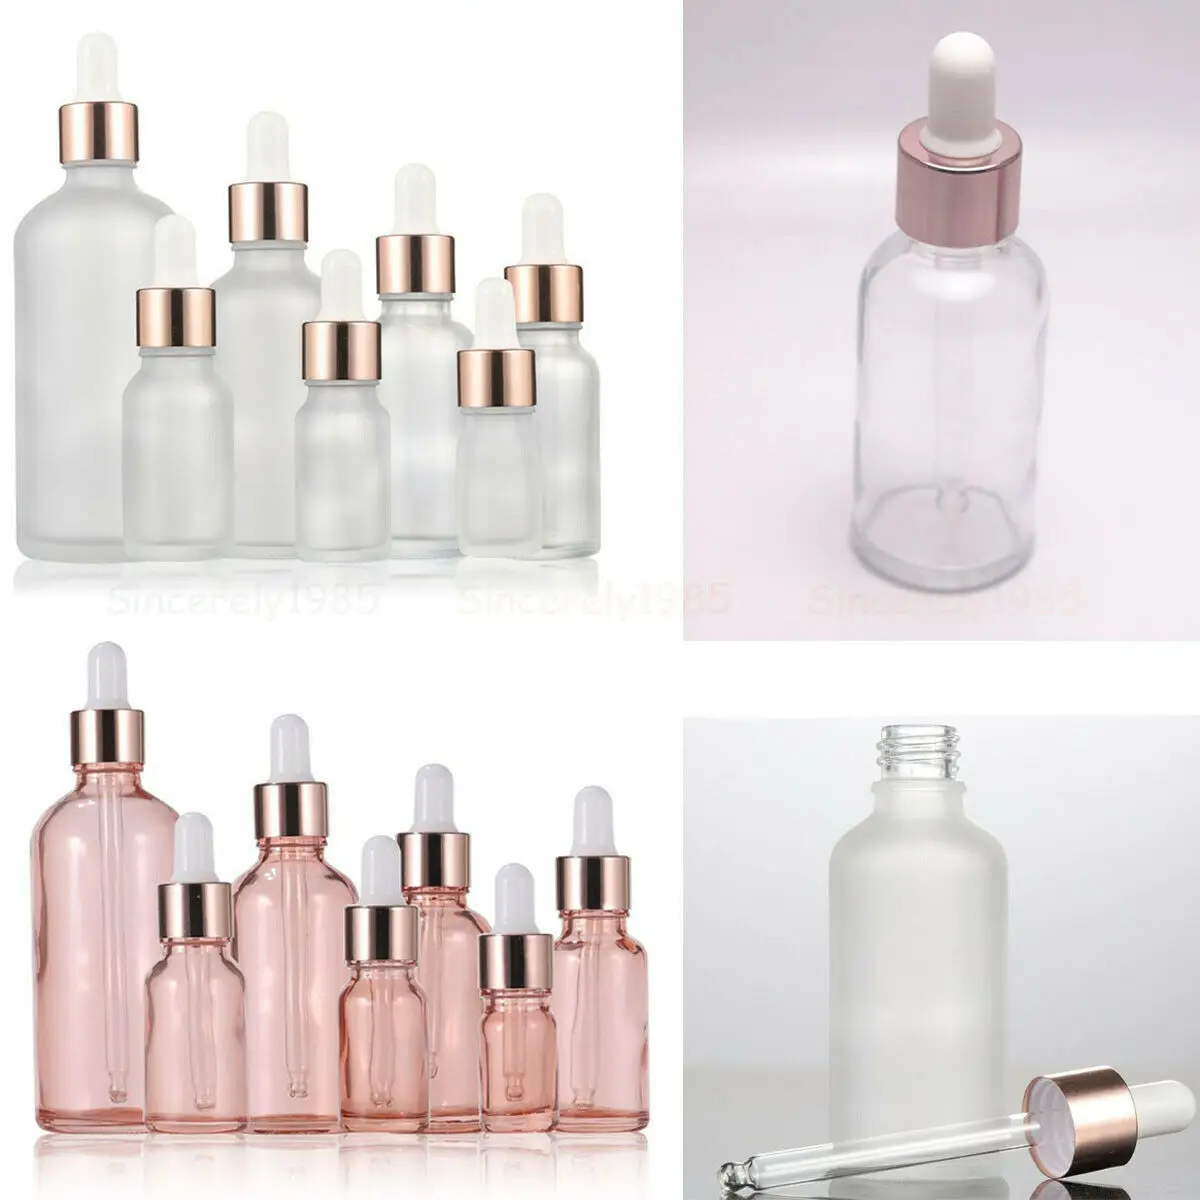 

10Pcs 5ml-100ml Translucence Cosmetic Packaging Dropper Glass Bottle With Rose Gold Cover Essential Oil Refillable Bottles